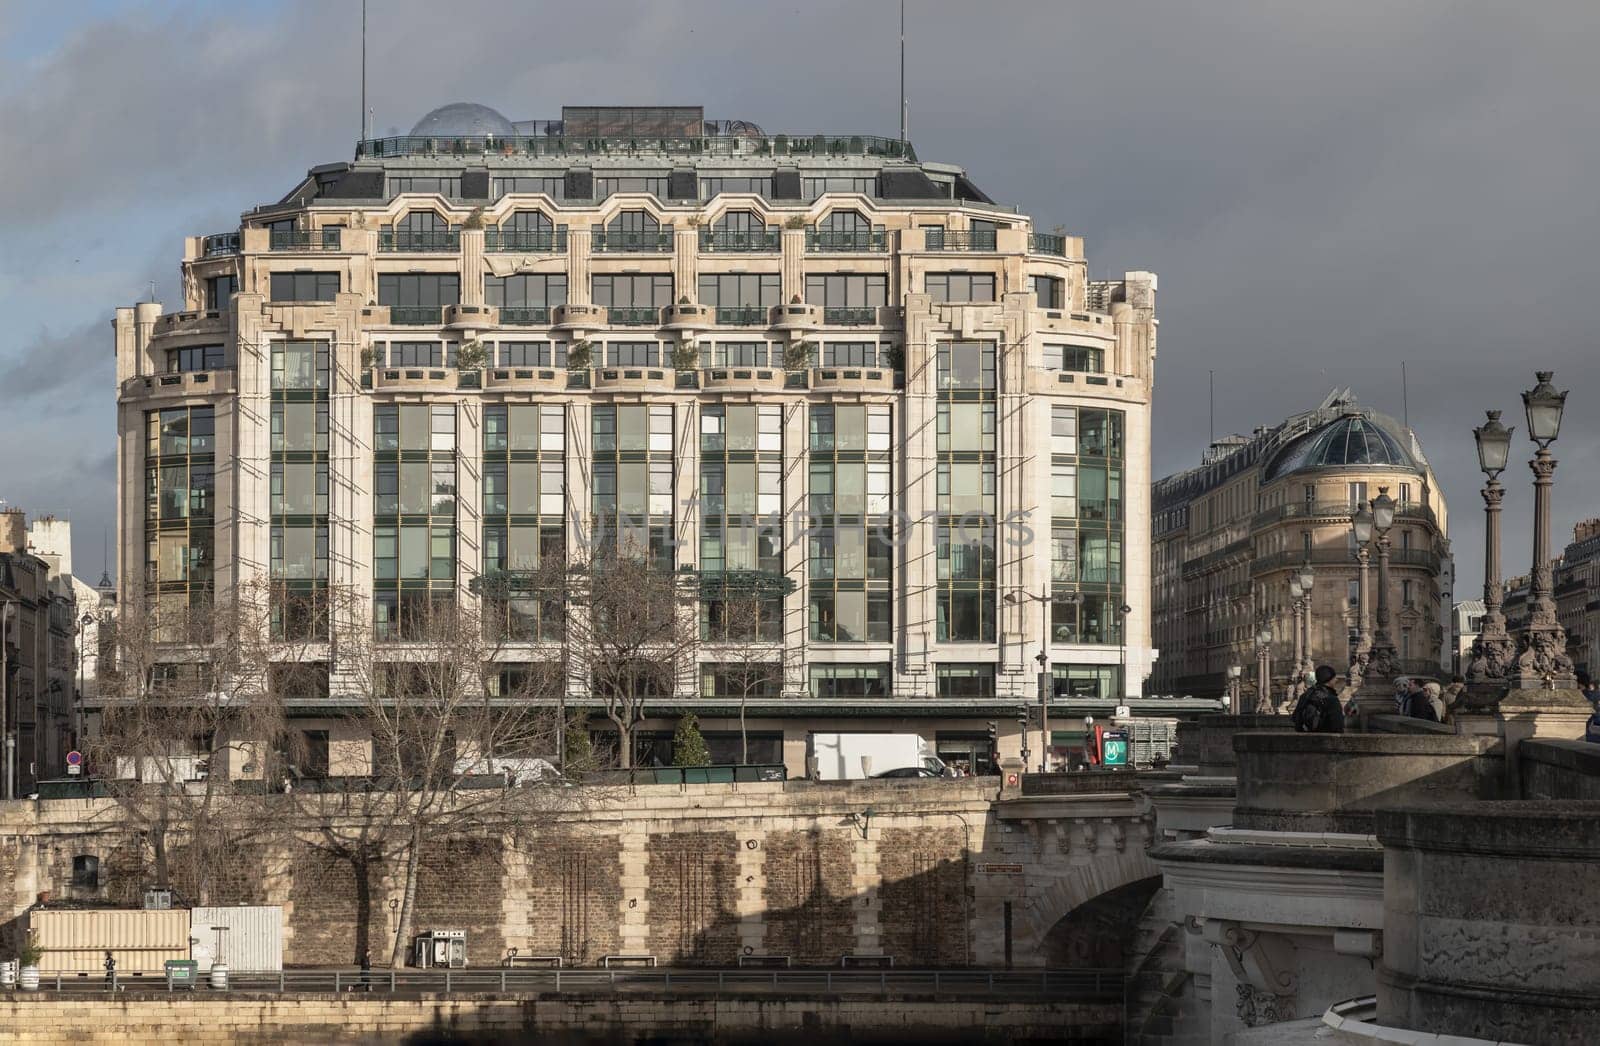 France, Paris - Jan 03, 2024 - Facade of the Samaritaine department store in Paris. Famous building with Pont Neuf in the foreground. Space for text, Selective focus.